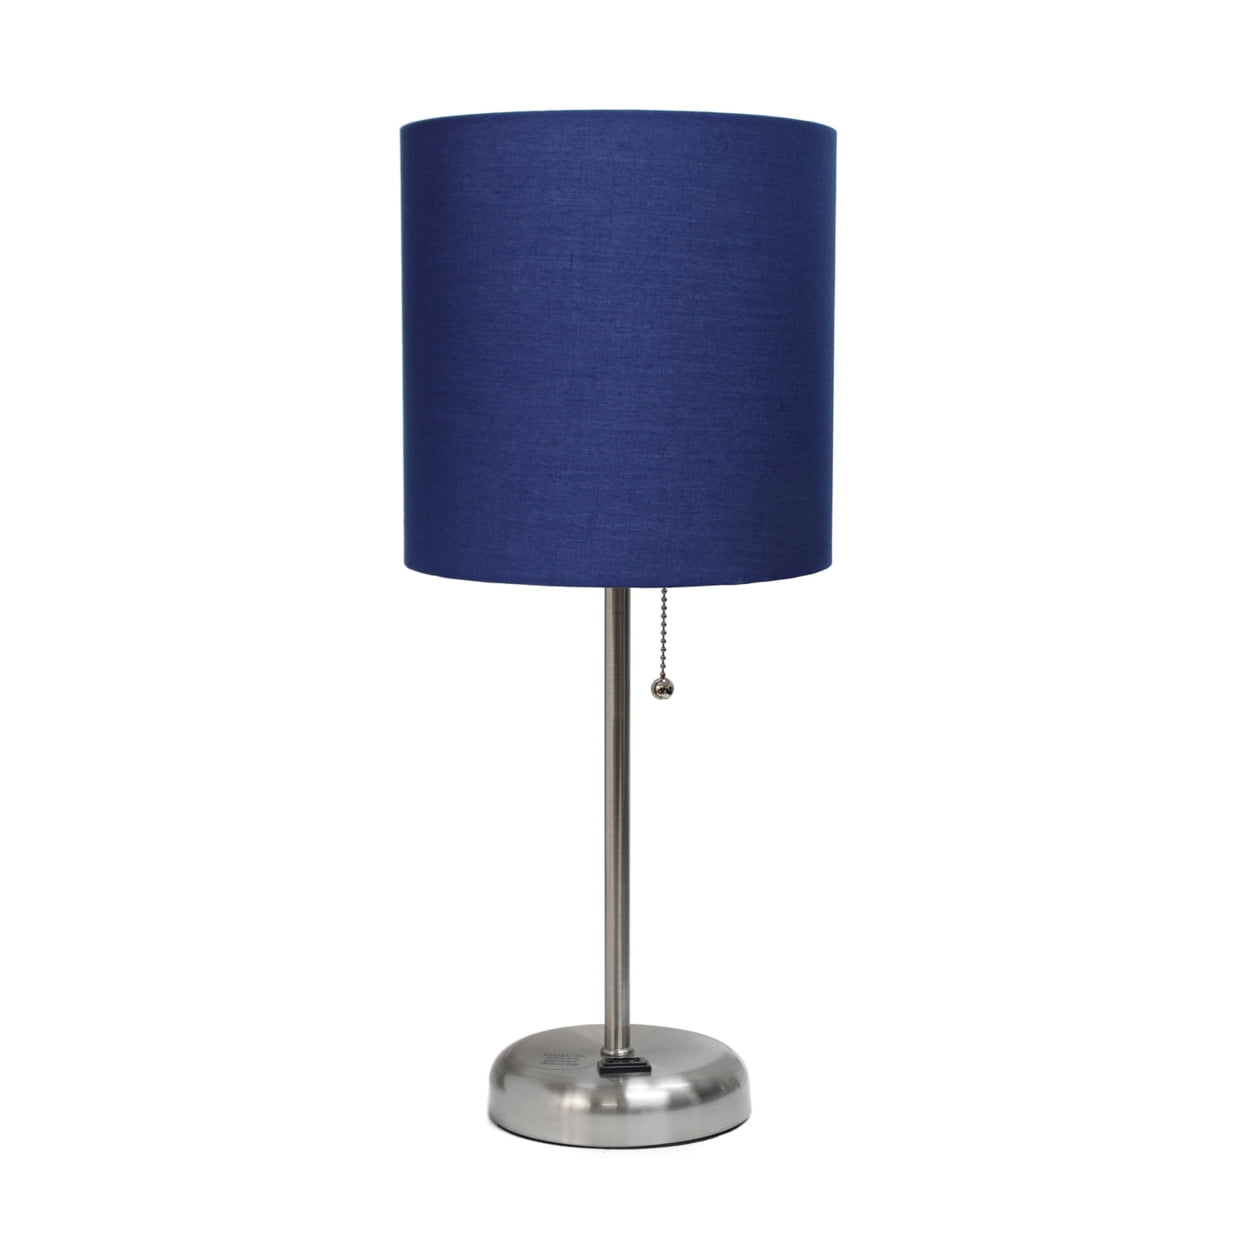 Lt2024-nav 60w Stick Lamp With Charging Outlet & Fabric Shade - Navy